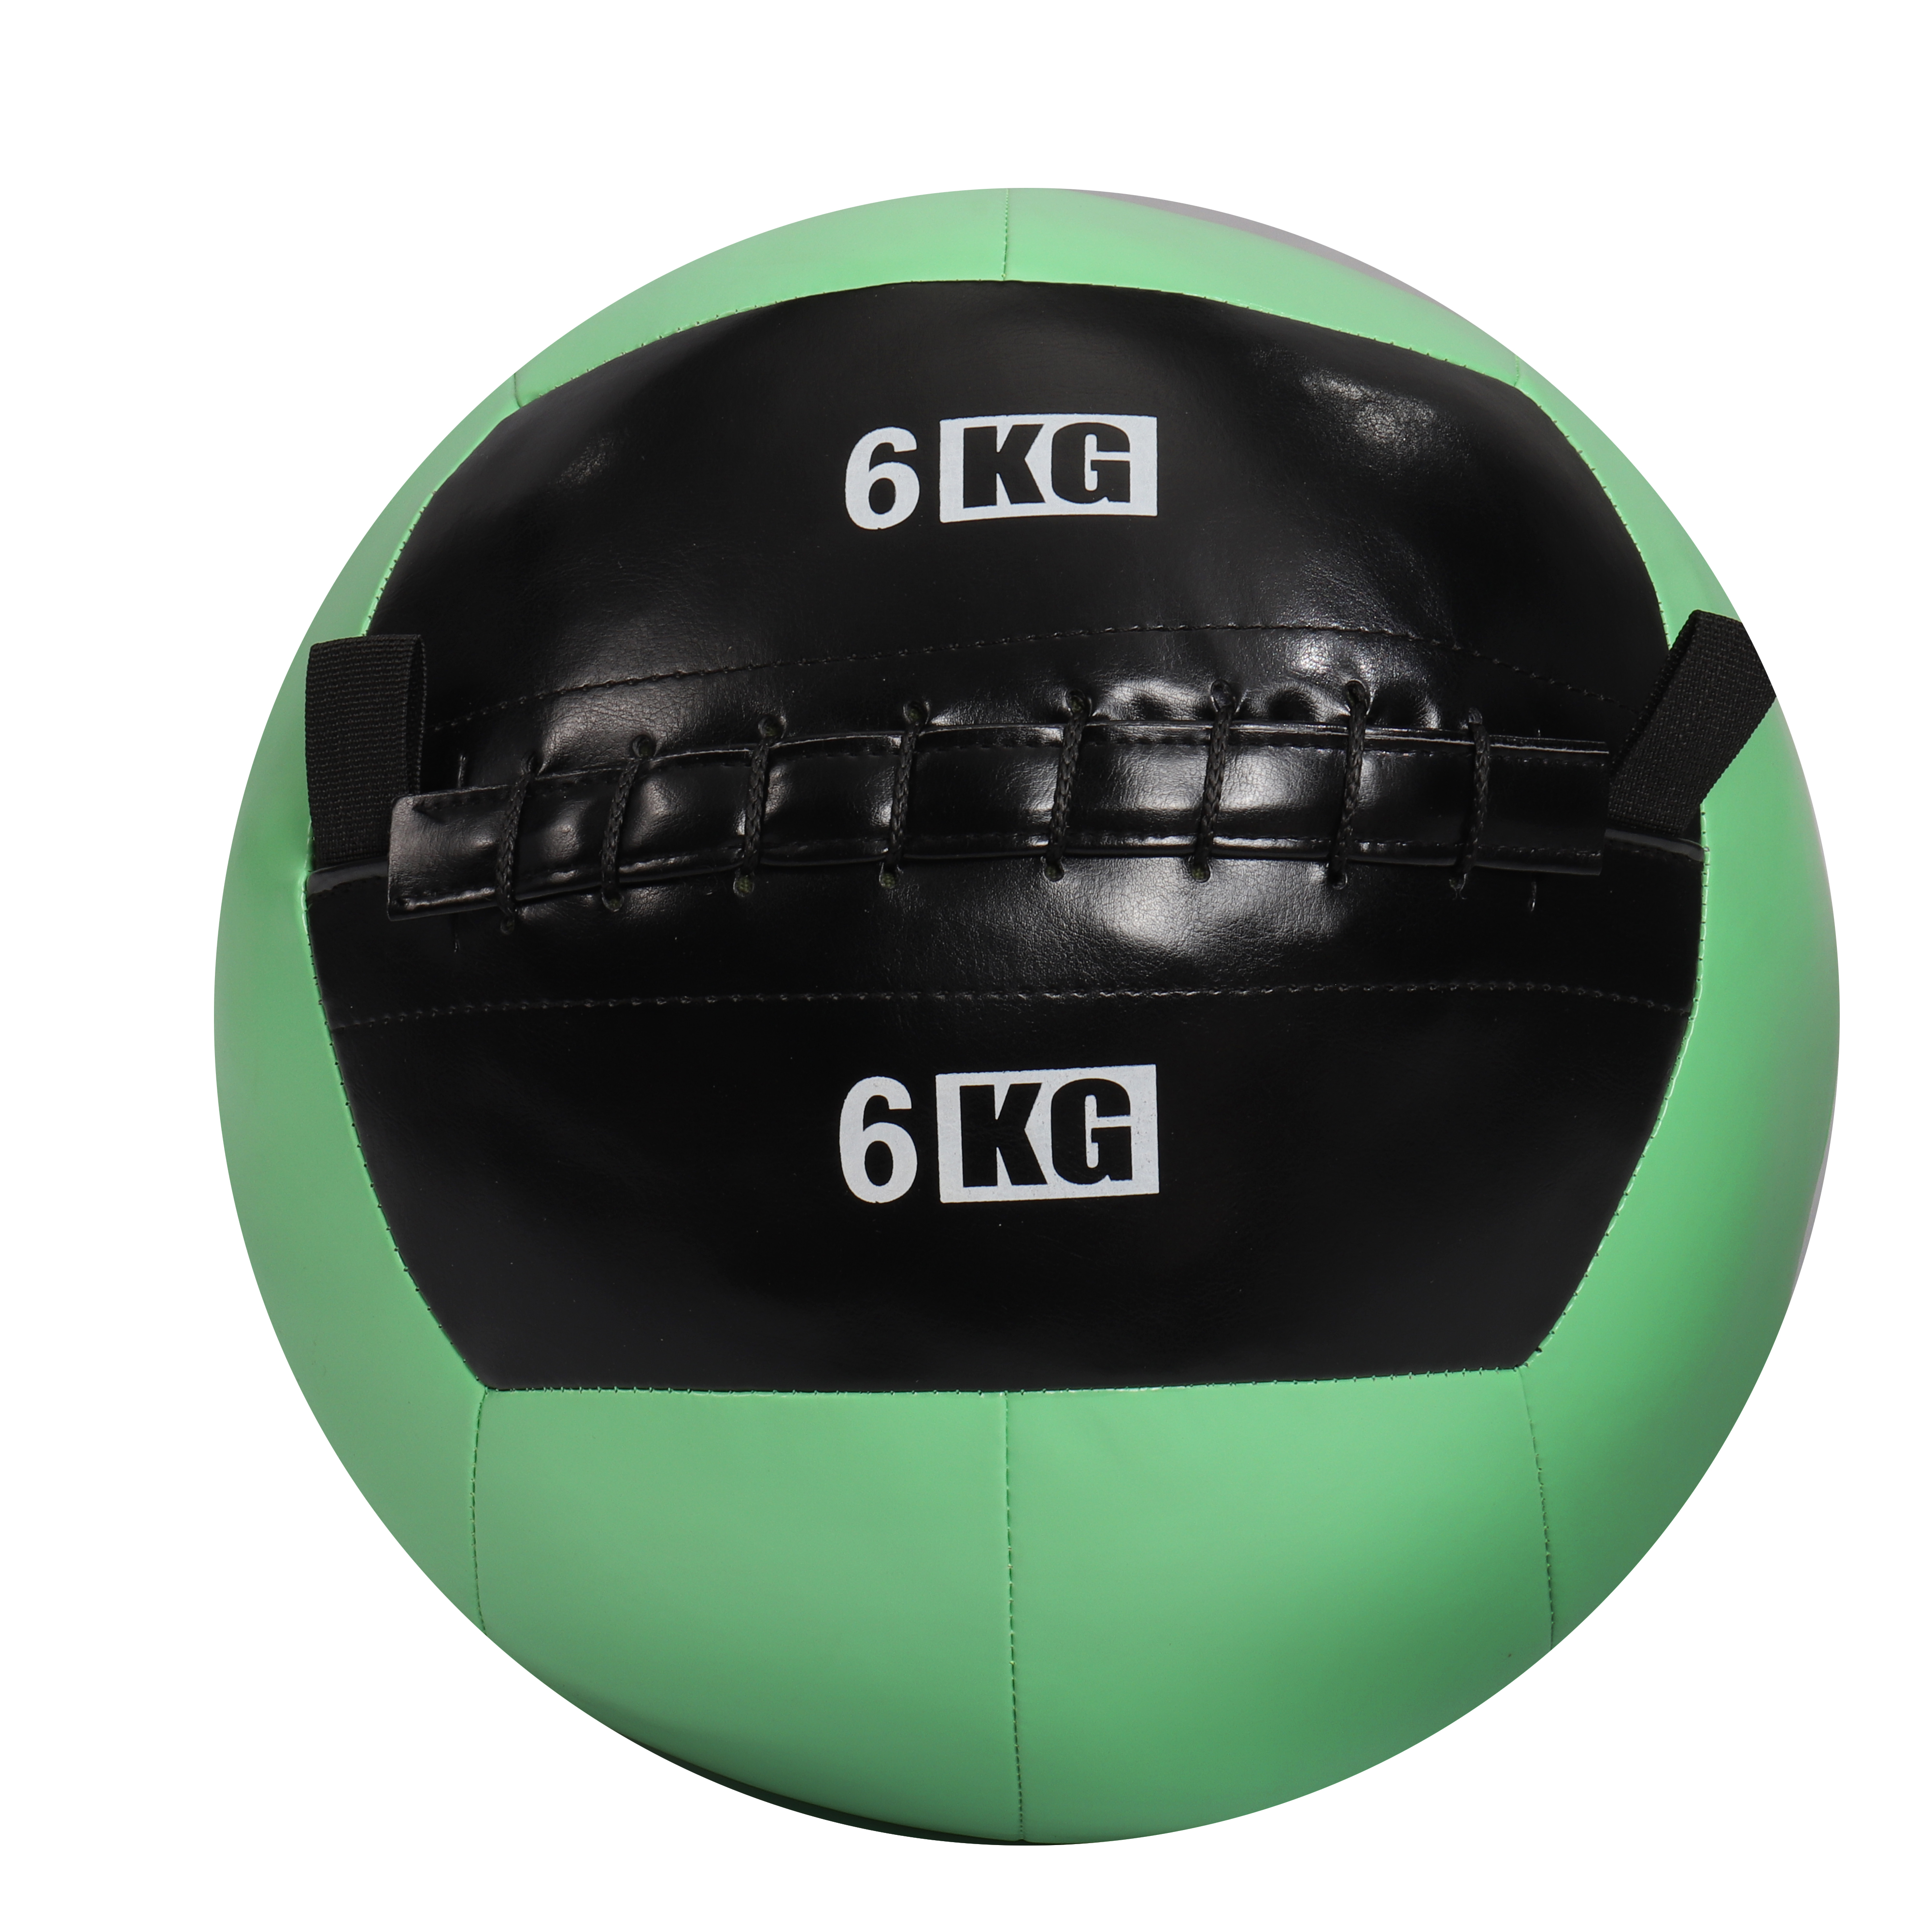 246KG-Weighted-Fitness-Balance-Ball-PU-Soft-Gym-Inelastic-Training-Exerciser-1748206-9